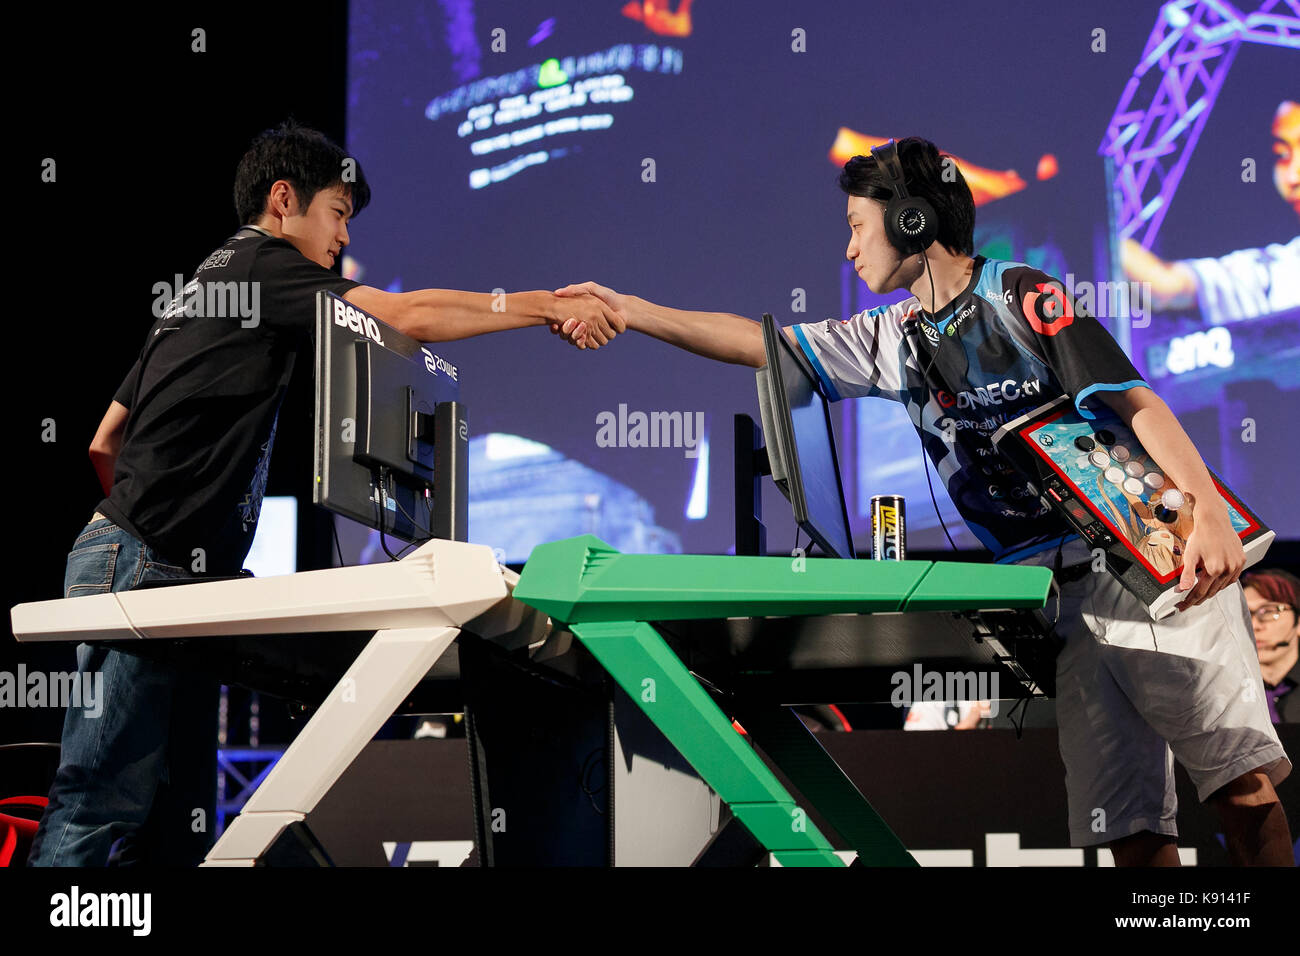 Chiba, Japan. 21st Sep, 2017. E-Sports players compete during the Tokyo Game Show (TGS 2017) on September 21, 2017, Chiba, Japan. This year's event hosts 609 companies from 36 different countries, introducing 1,317 video game titles for smartphones, games consoles, VR, AR and MR platforms. The show, which expects to attract 250,000 visitors, runs until September 24 at the International Convention Complex Makuhari Messe in Chiba; and will be streamed live around the world. Credit: Rodrigo Reyes Marin/AFLO/Alamy Live News Stock Photo